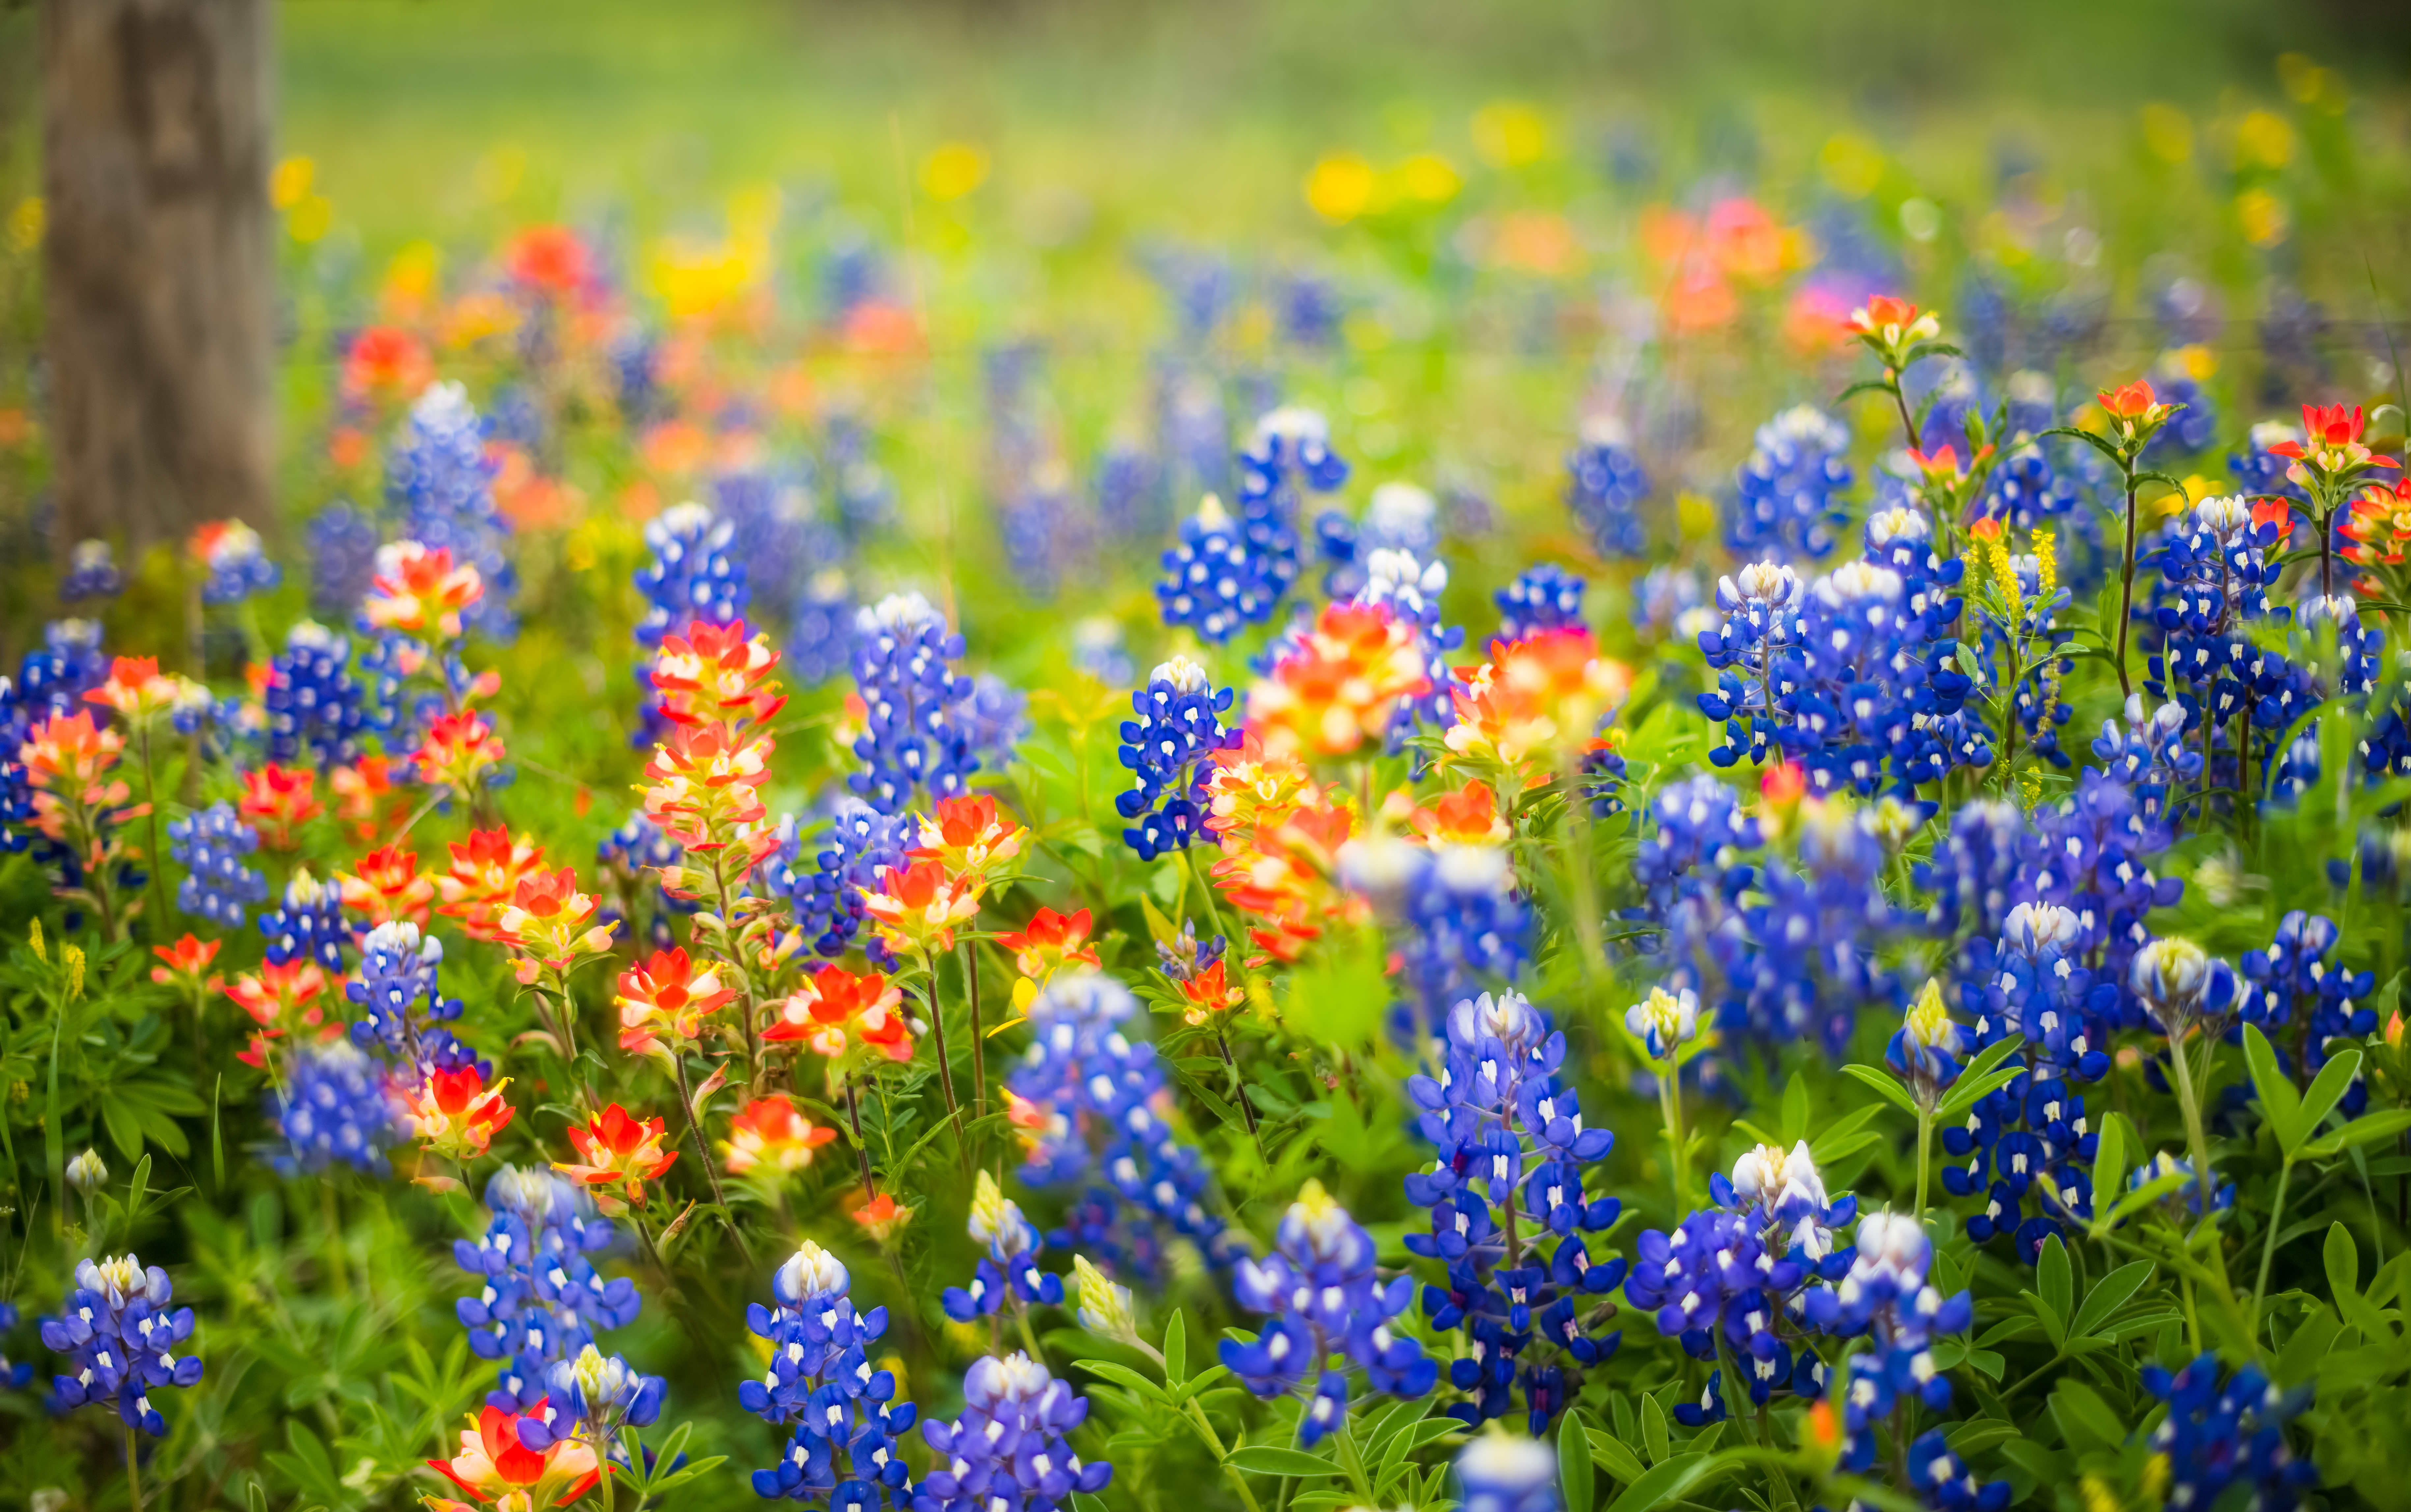 Springtime in Texas | Marketing Where Technology Intersects Life